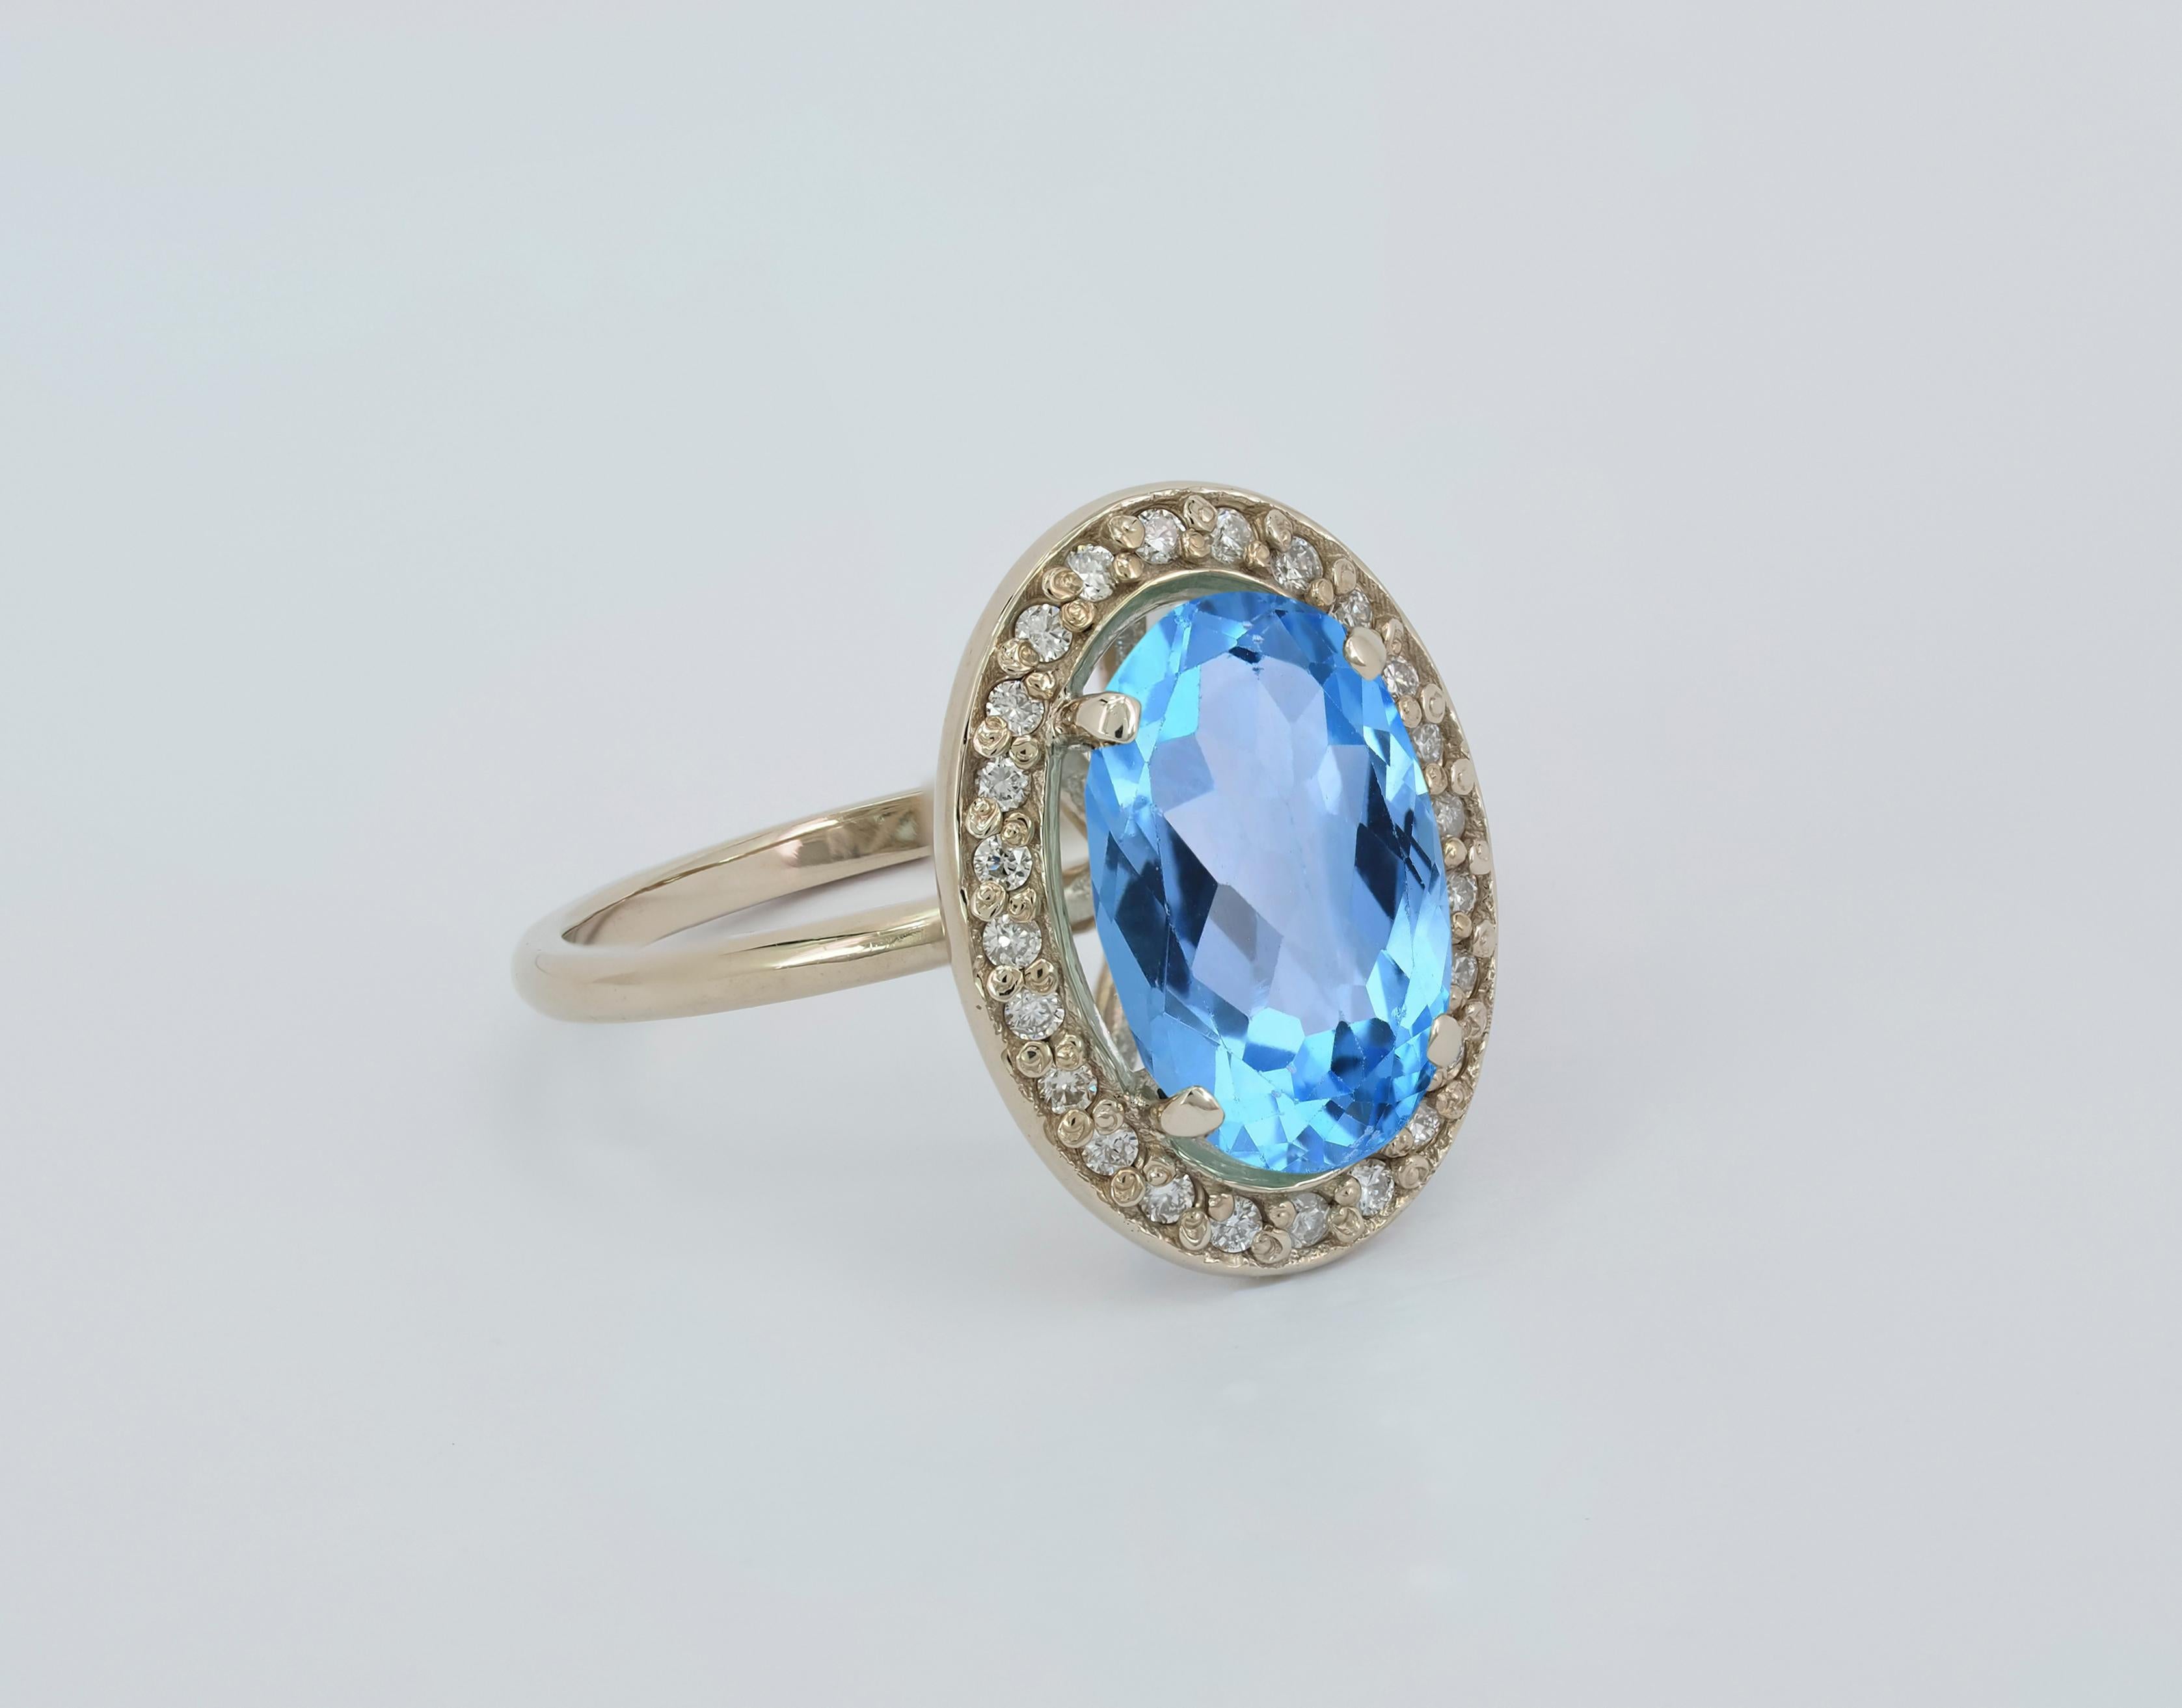 For Sale:  Topaz and diamonds 14k gold ring. 4